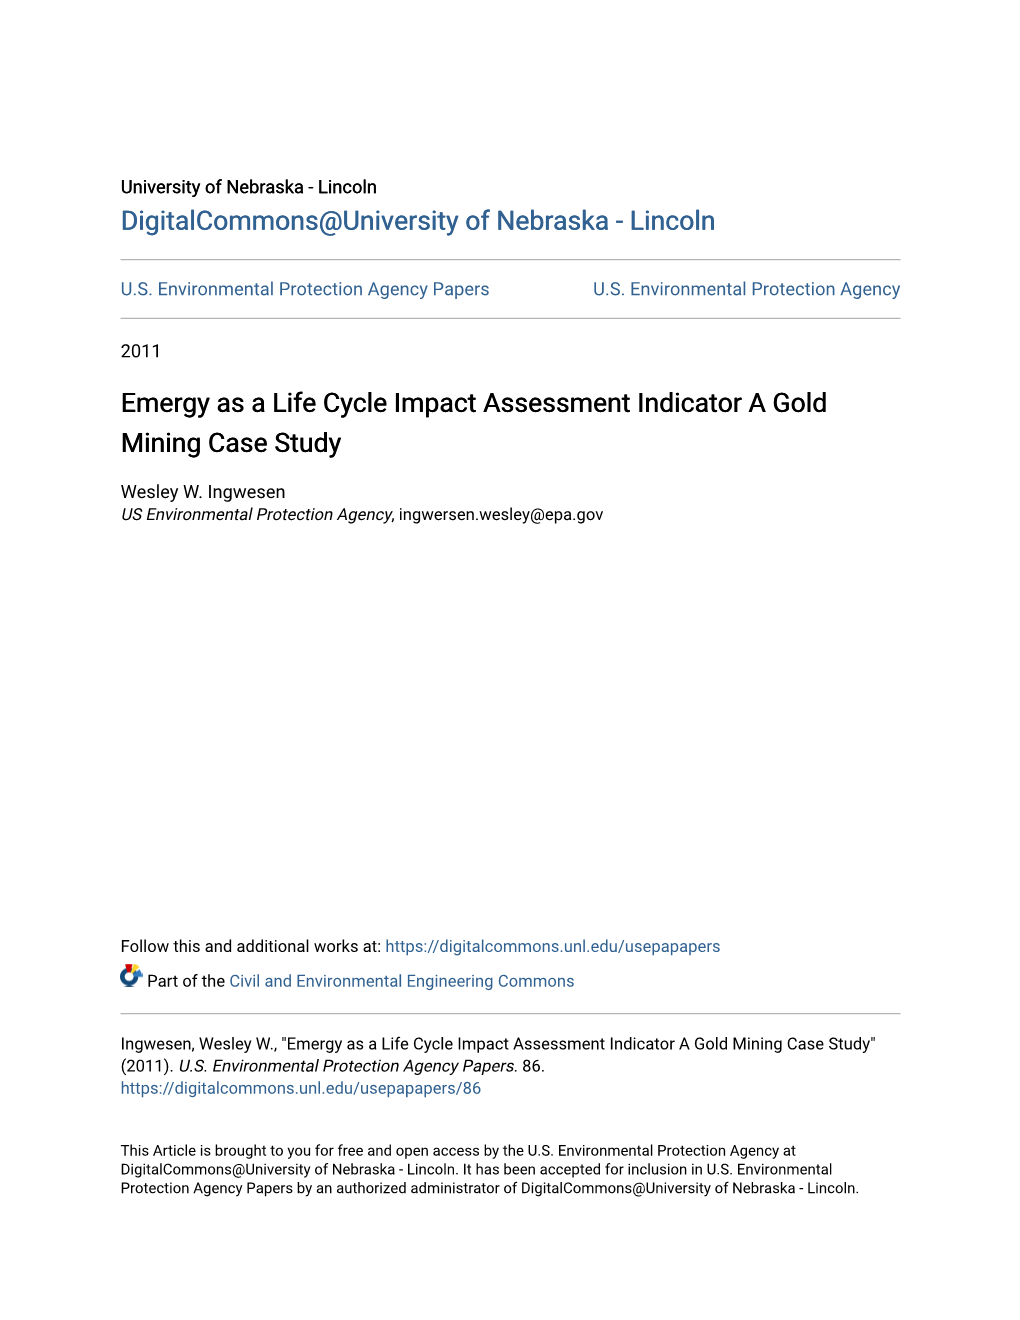 Emergy As a Life Cycle Impact Assessment Indicator a Gold Mining Case Study